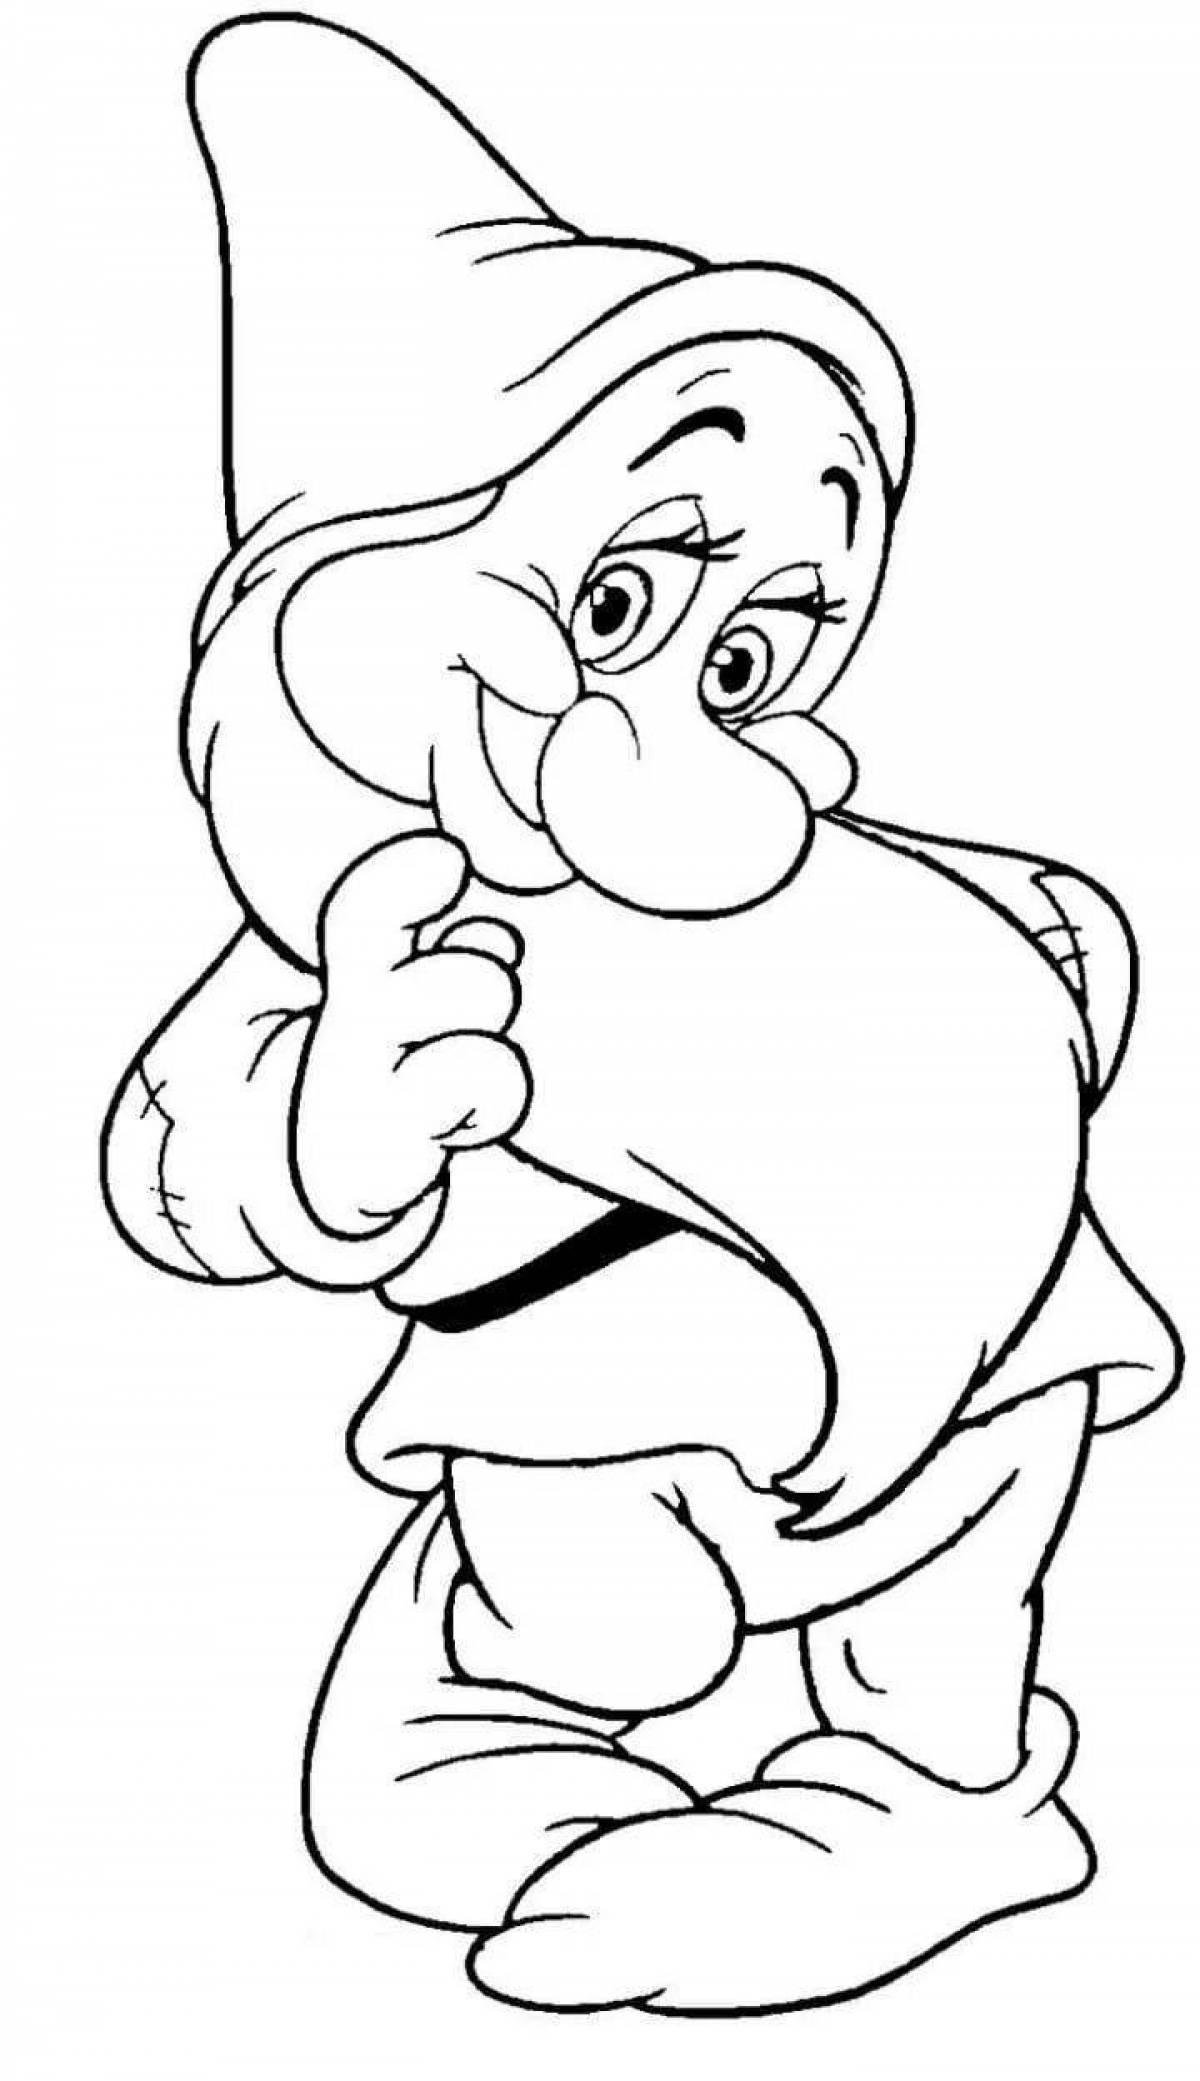 Coloring page cheerful dwarf